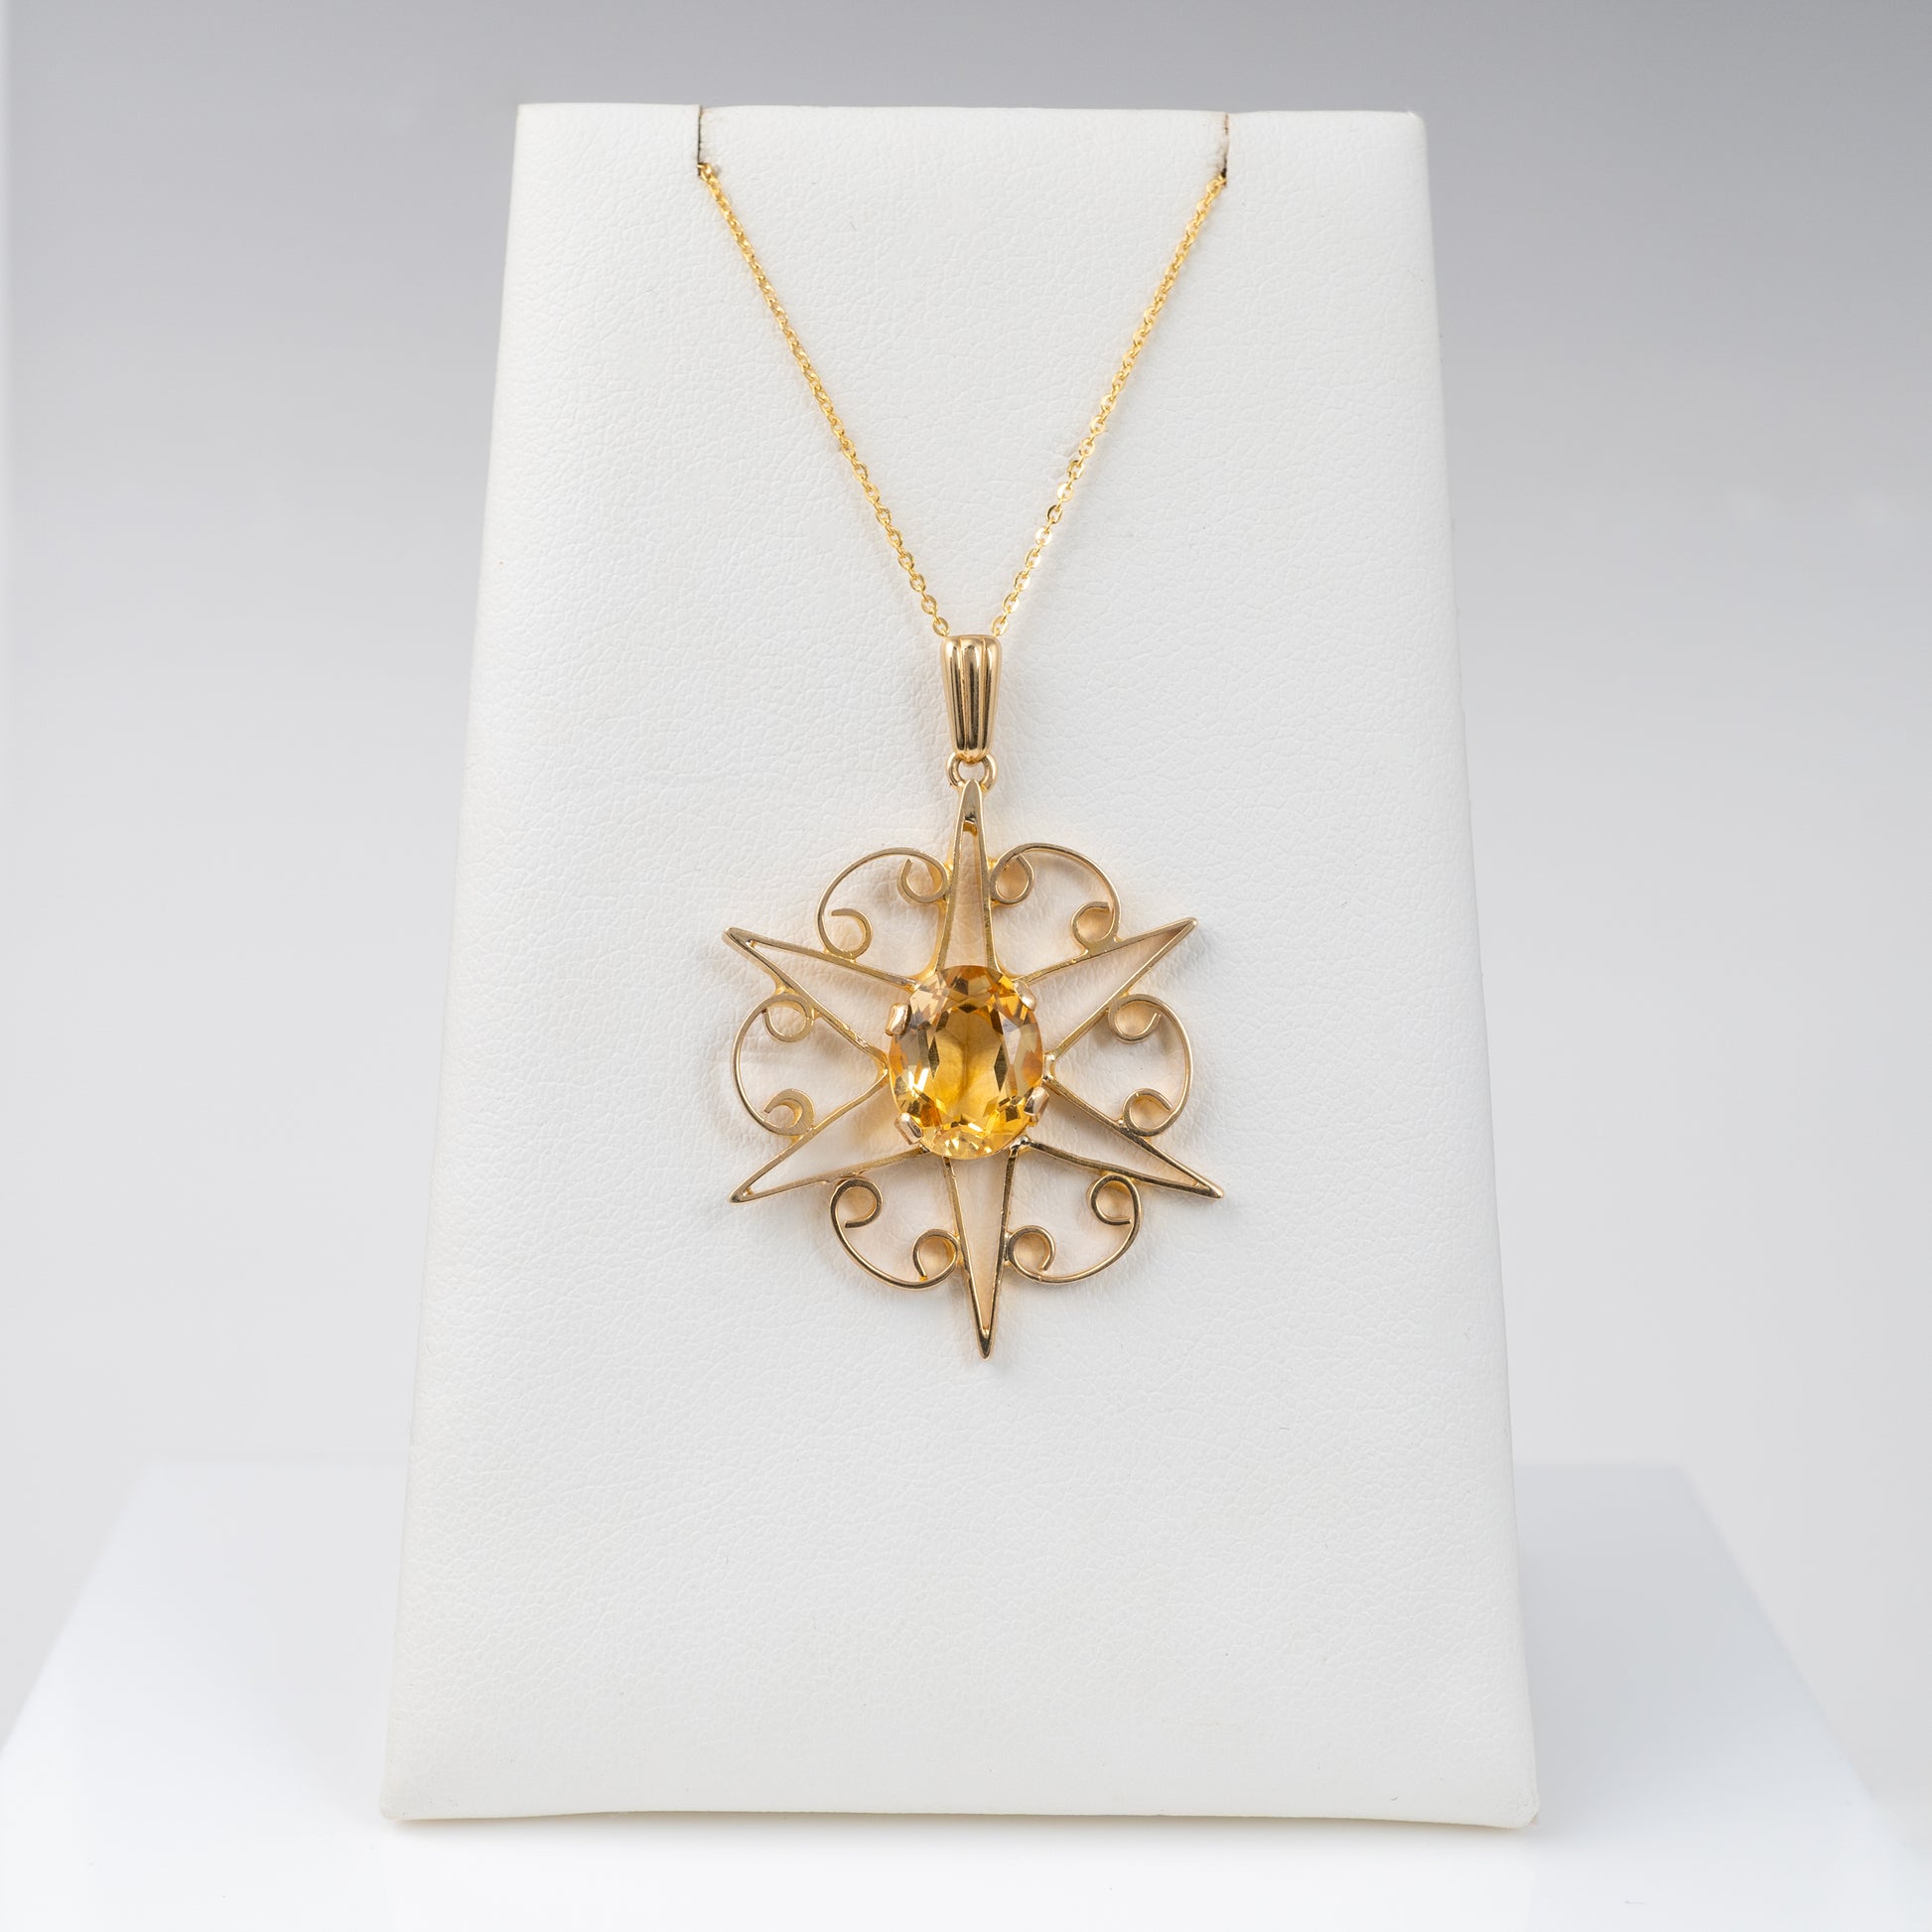 Vintage Citrine Necklace in 9ct Gold - Pre-owned